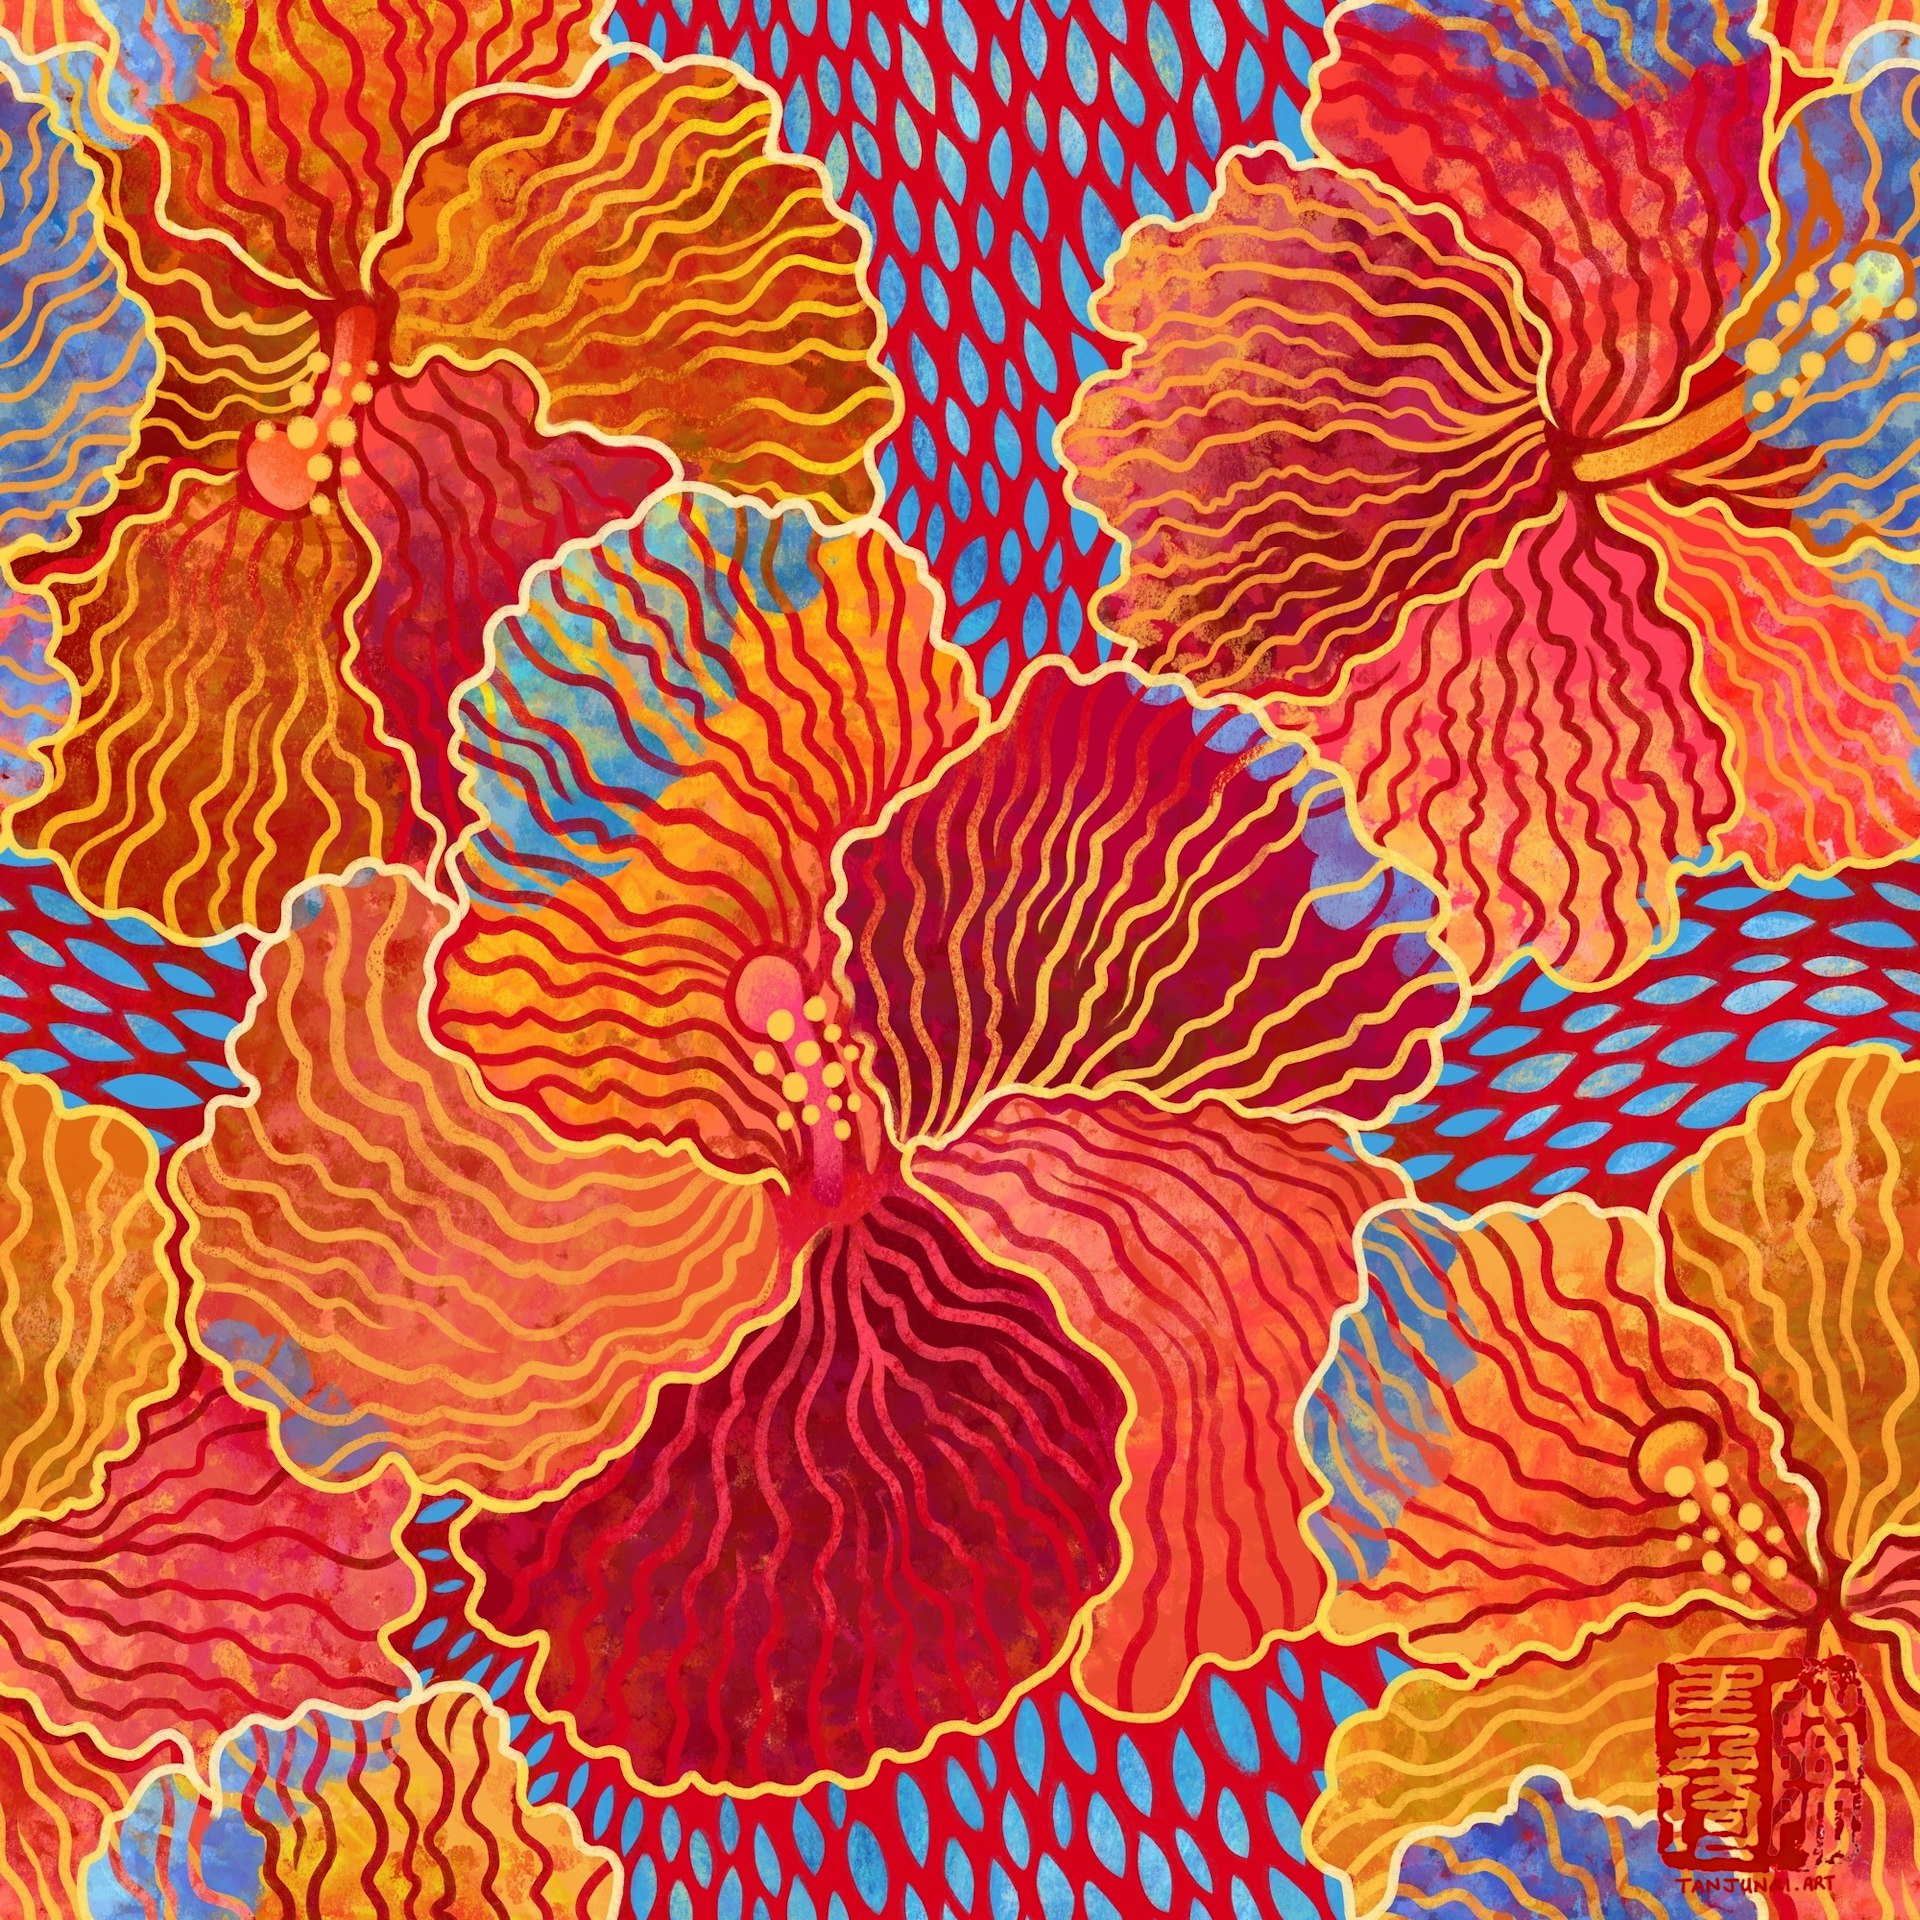 Digitally painted floral design of overlapping red hibiscuses, done in a slightly graphic and textured style inspired by batik and Chinese papercuts. The hibiscus are different hues of red and magenta, while the outlines are golden, and their overlapping parts are blue, against a background with a dark blue pattern.